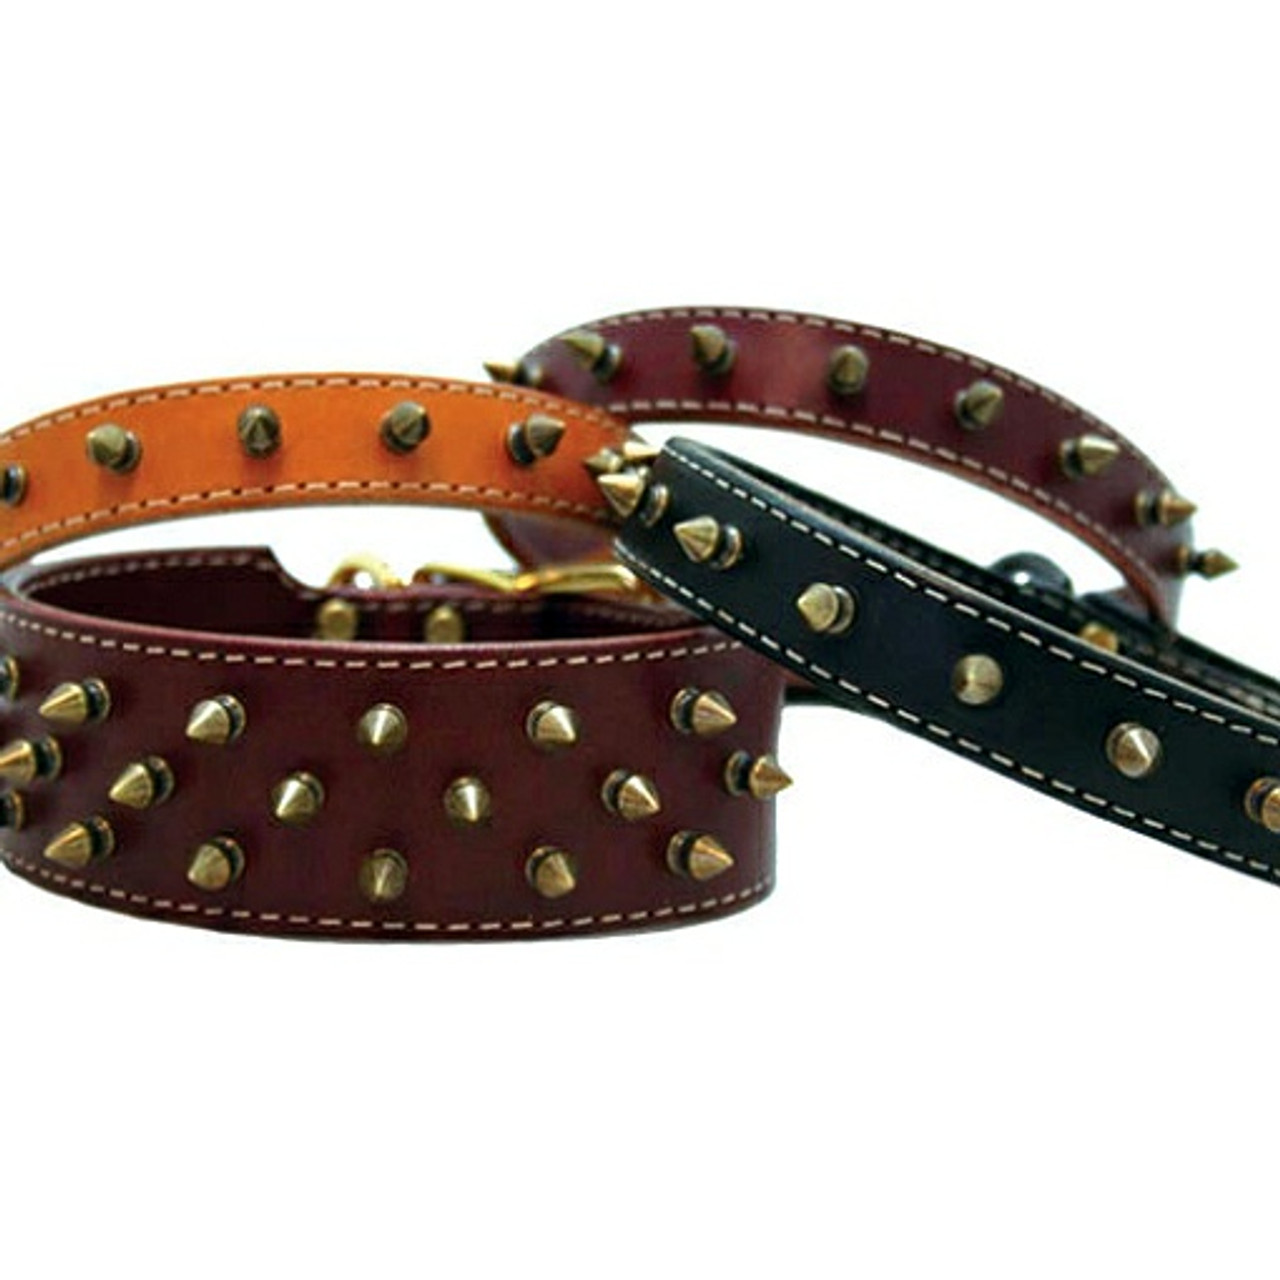 Matching Collar And Leash Set For Larger Dogs - Spiked Designer